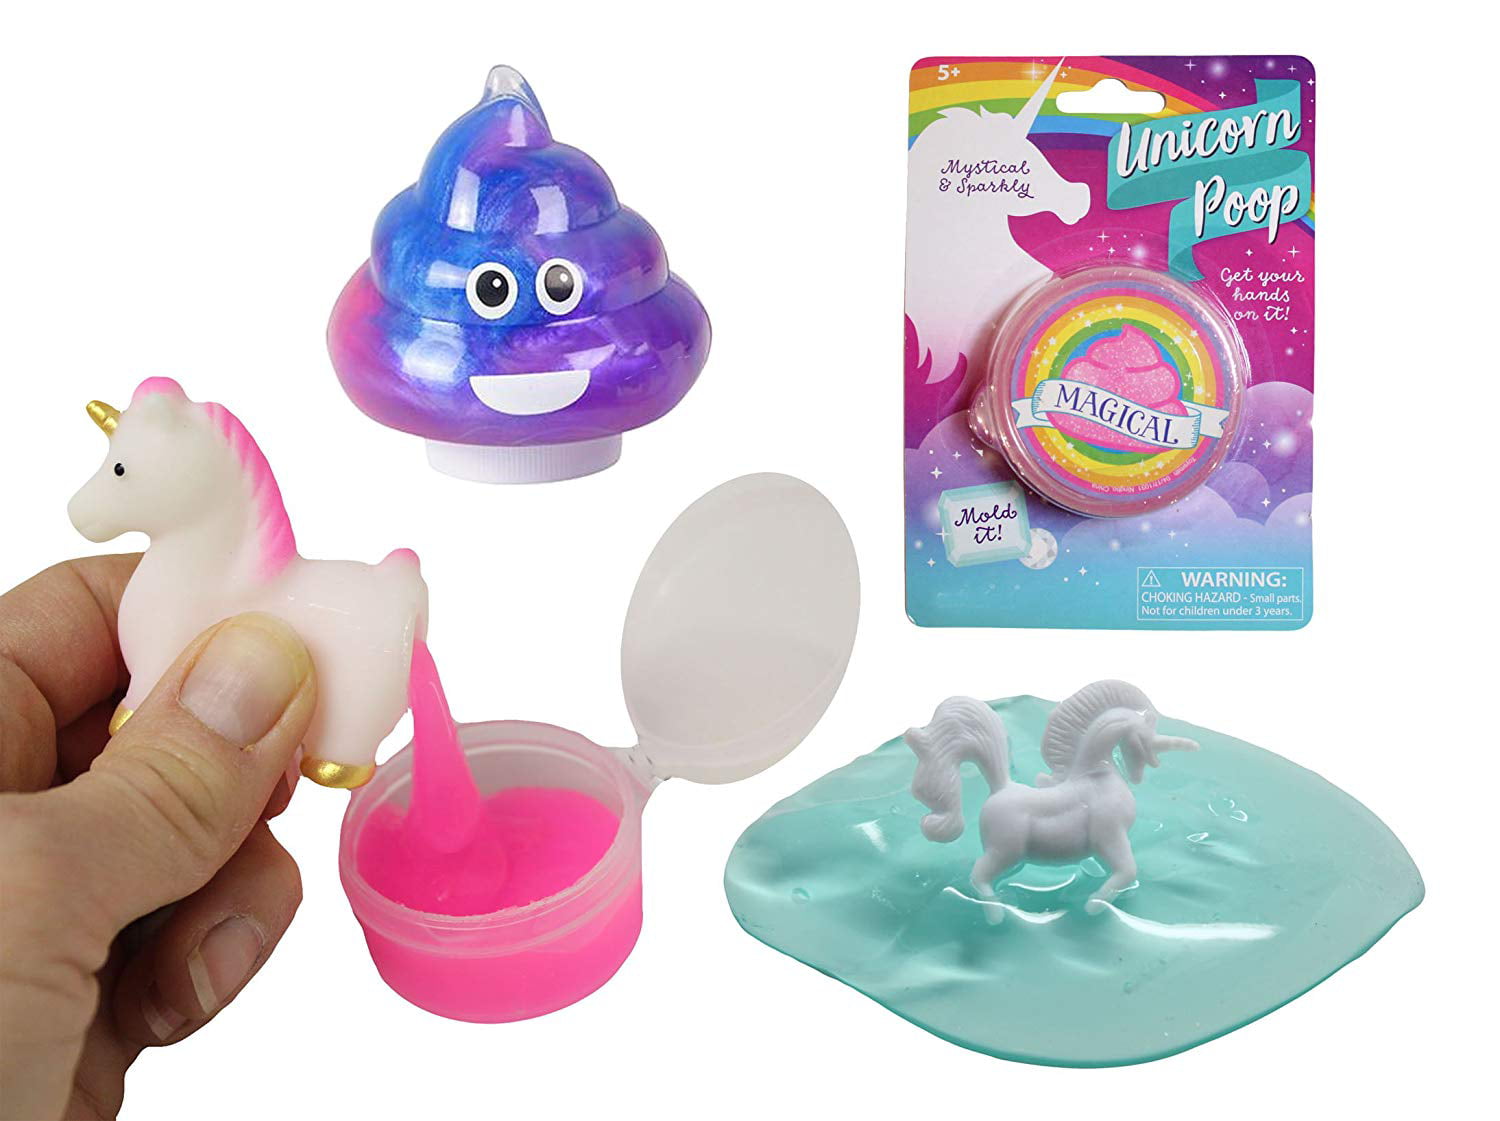 Magic Unicorn Reinder Glitter Poo or Bogies Slime Toy Kids Gift Stres Relif a29 